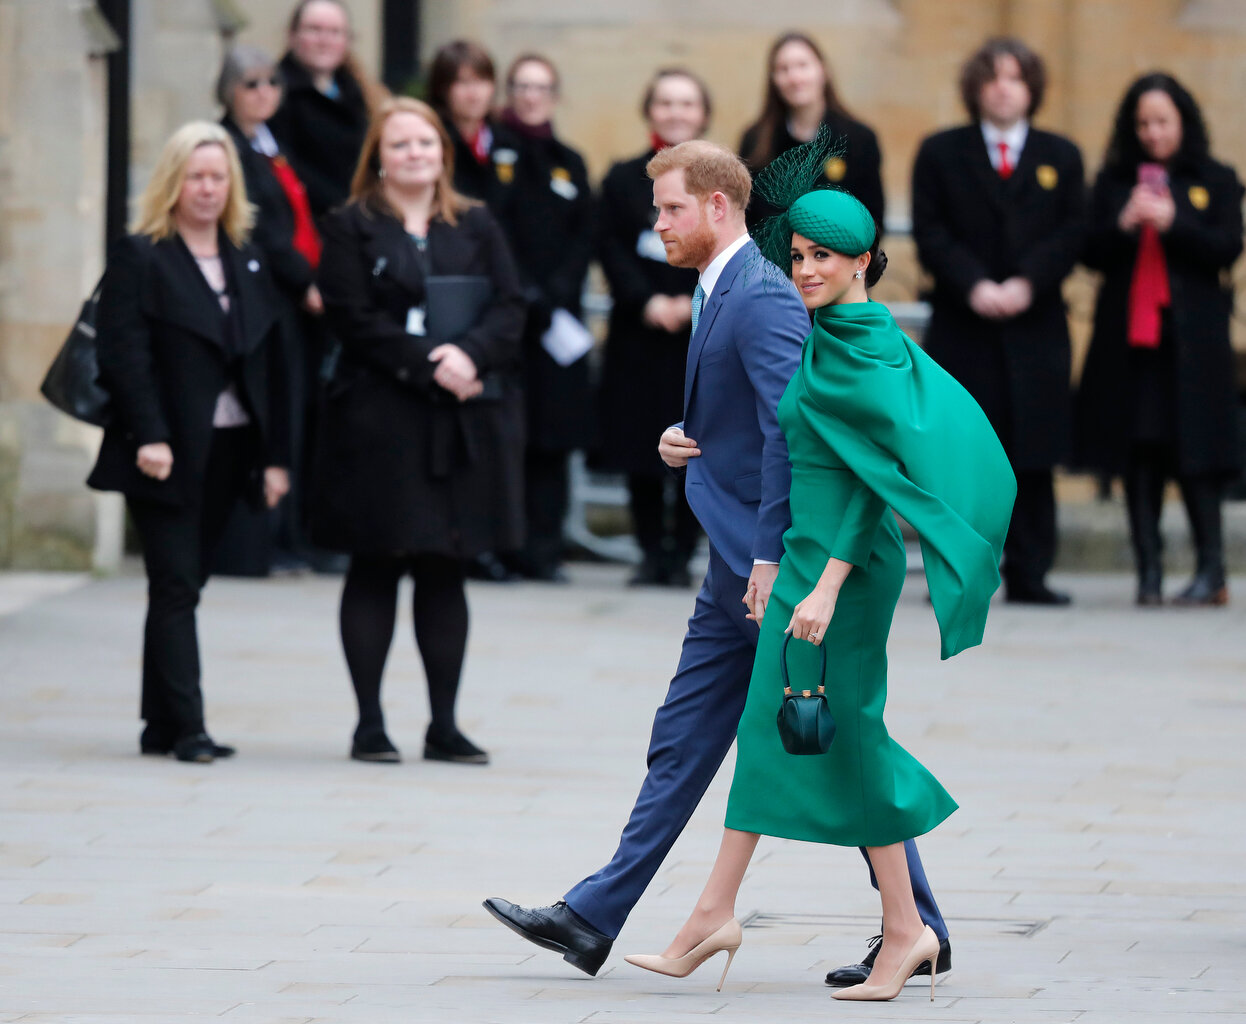  Britain's Prince Harry and Meghan, Duchess of Sussex arrive to attend the annual Commonwealth Day service at Westminster Abbey in London, Monday, March 9, 2020.  (AP Photo/Frank Augstein) 